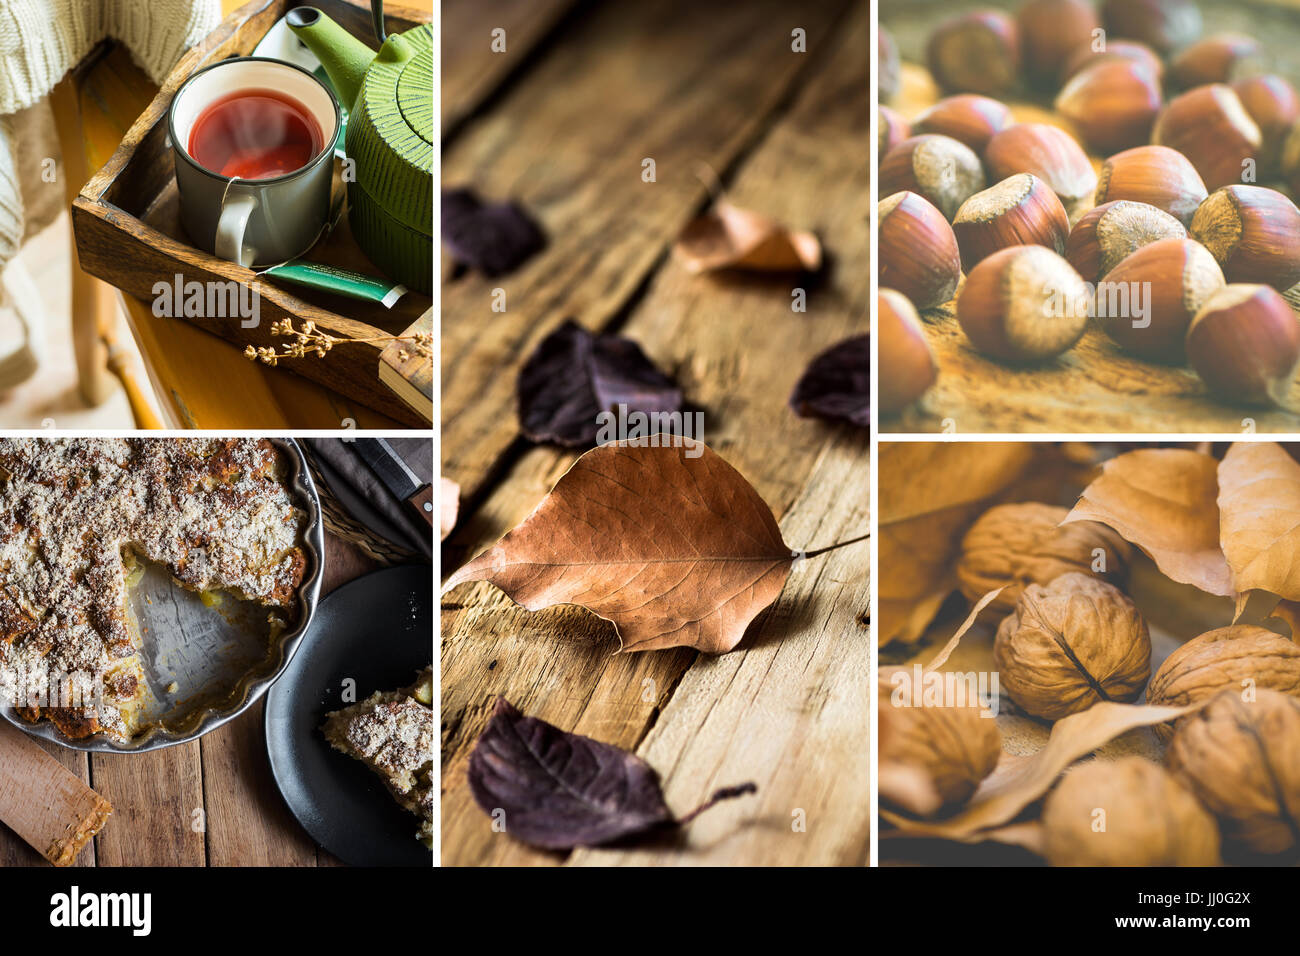 Photo collage, autumn, fall, dry brown red leaves, walnuts hazelnuts, apple cake, mug with red fruit tea, book, cozy atmosphere, kinfolk, hygge style Stock Photo